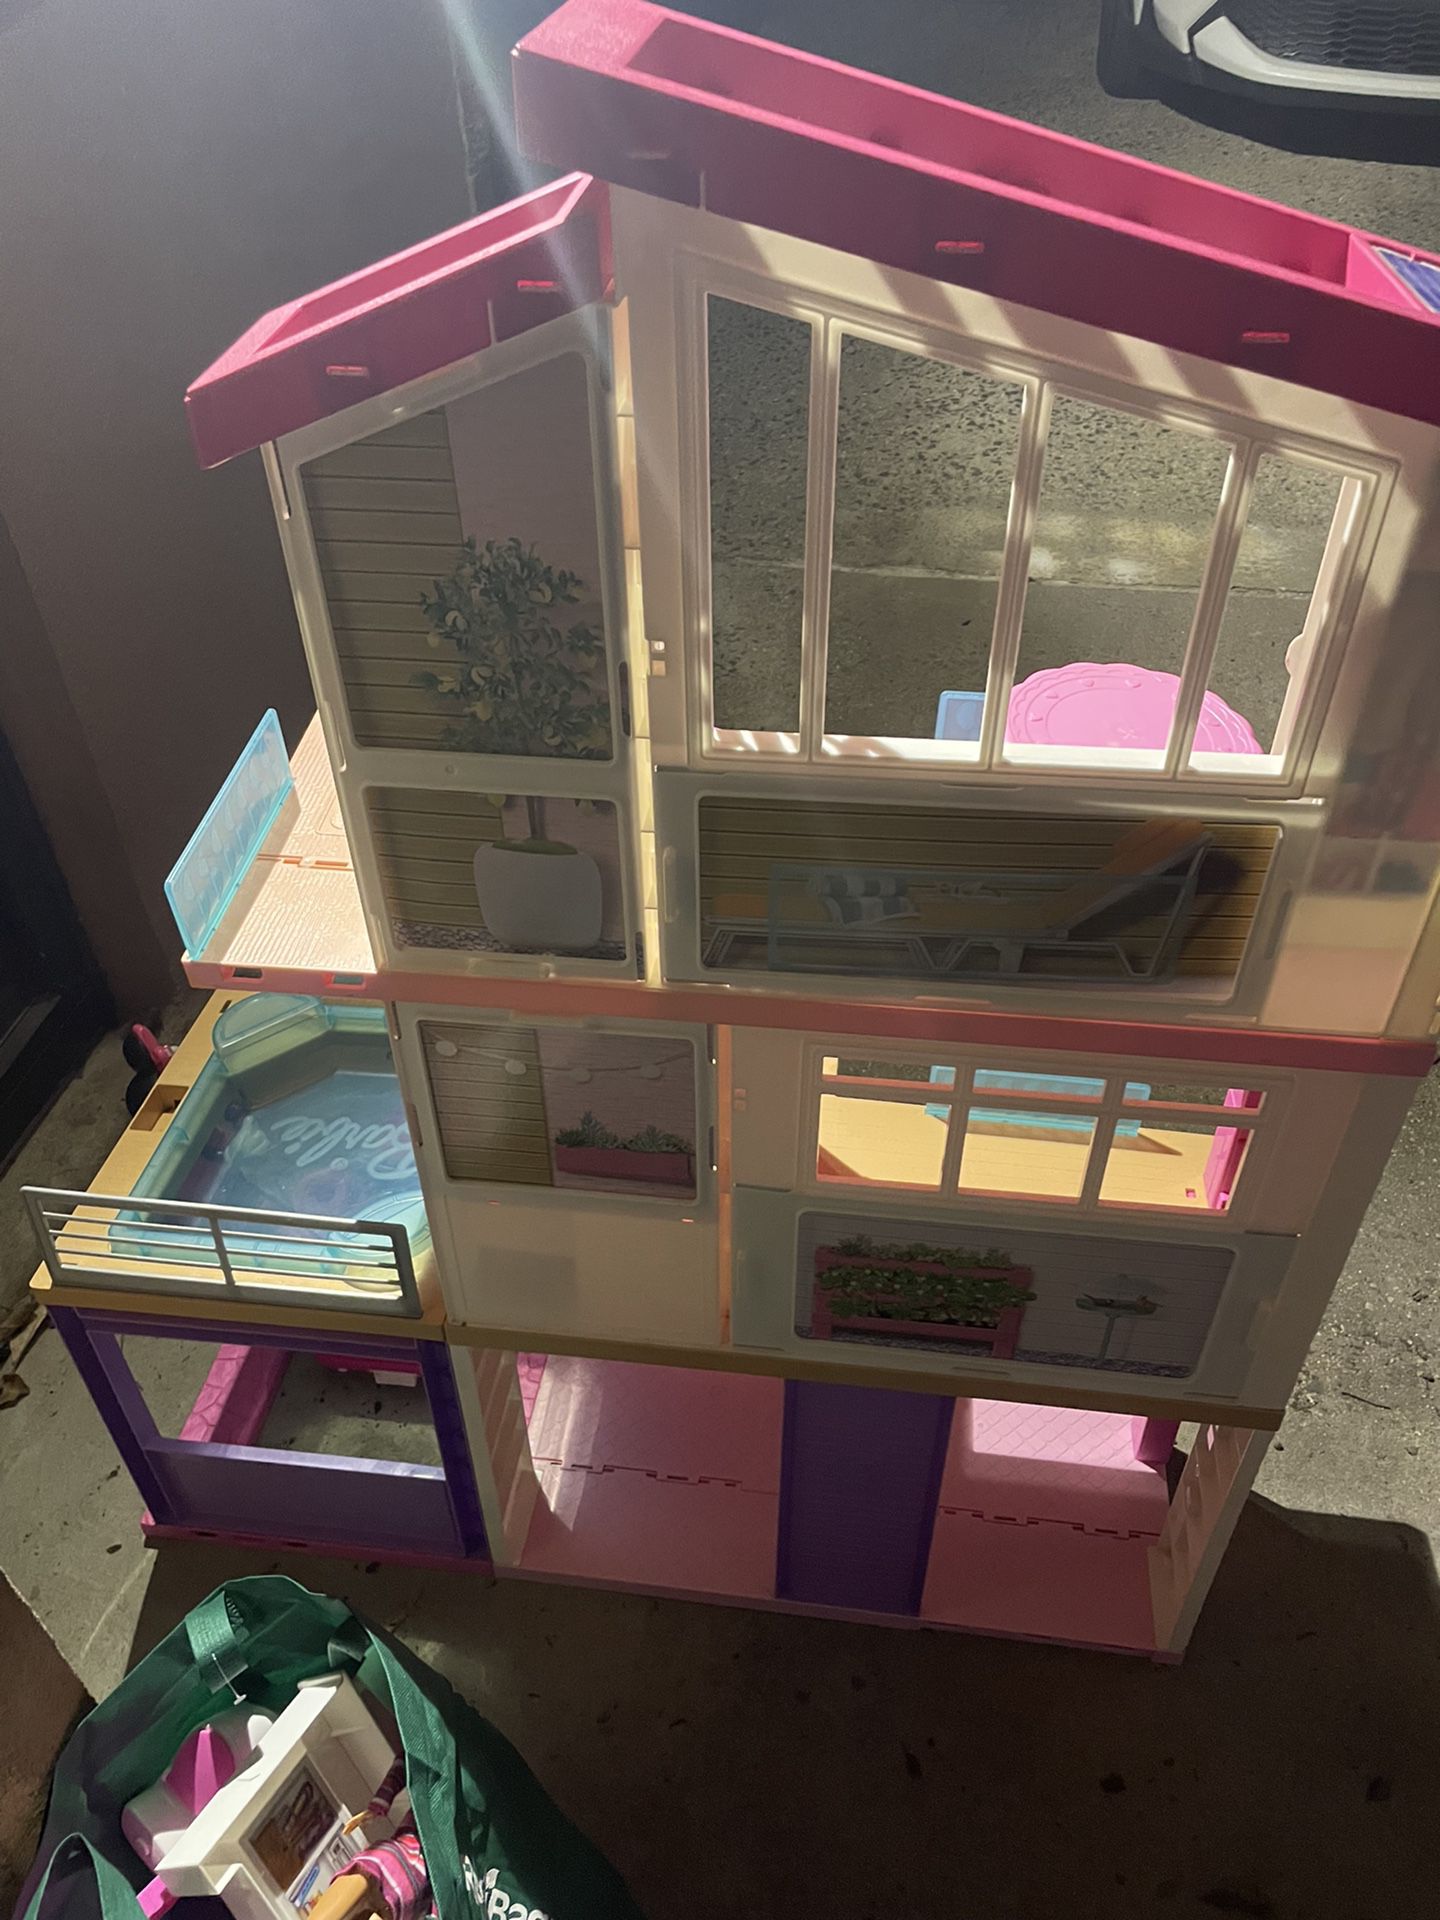 Barbie House , Dolls And More! (see full post)